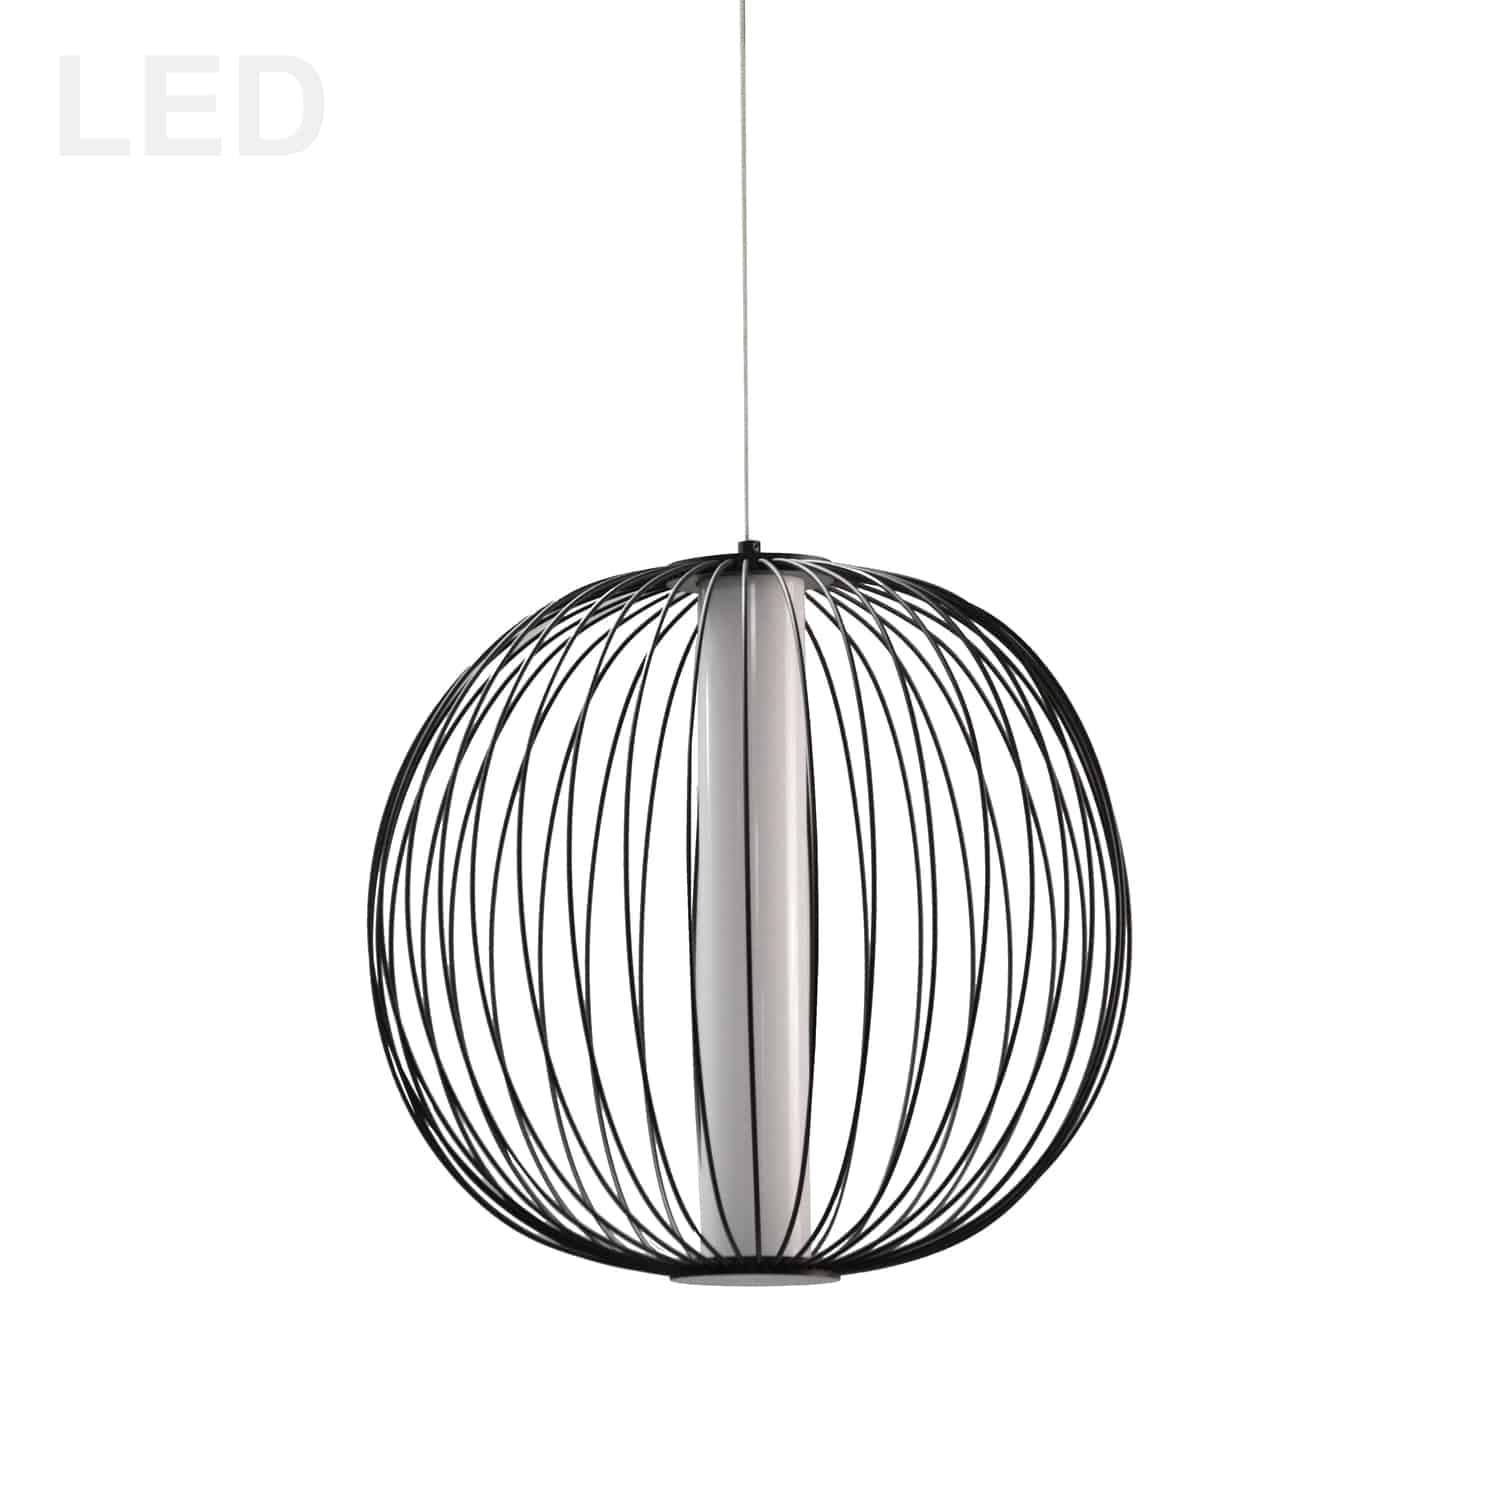 The Charlotte family of lighting has an open, airy feel, and an artisan-style look with a thoroughly contemporary edge. The design catches the eye, and will add a note of luxury to contemporary or minimalist décor schemes. A metal frame descends from a drop into a spherical cage frame in a matte finish. At the center of the globe, a white acrylic diffuser softens the light to a warm, skin-friendly glow. Charlotte lighting will create a focal point in your living or dining room, or bedroom with noticeable style.